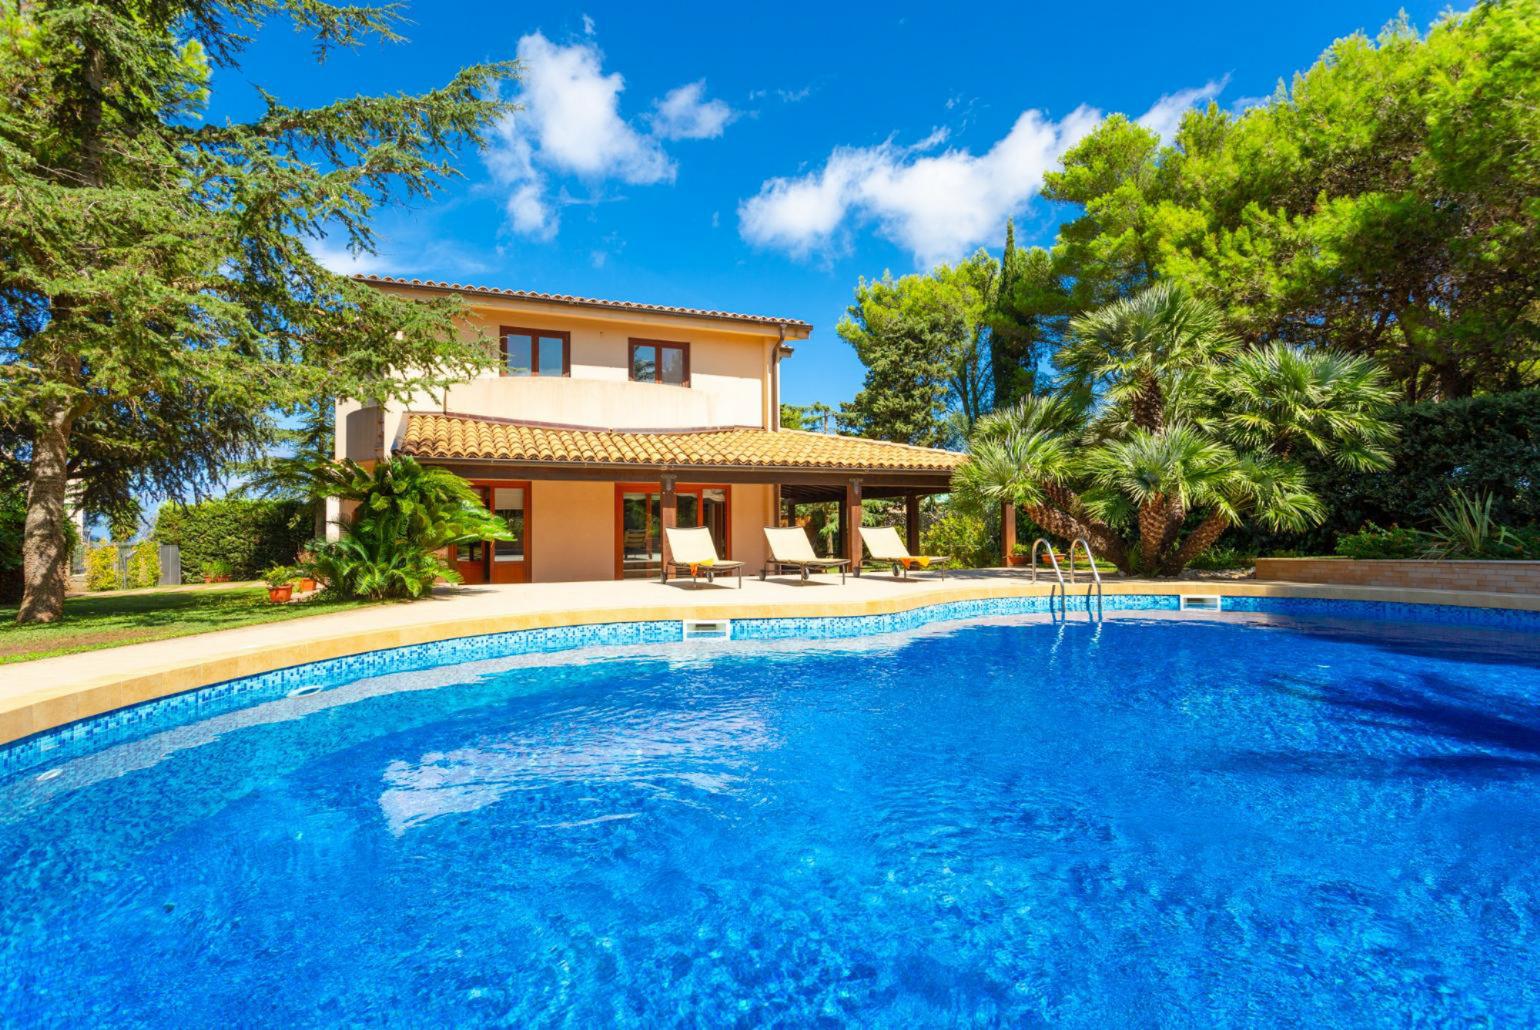 ,Beautiful villa with private pool, terrace, and garden